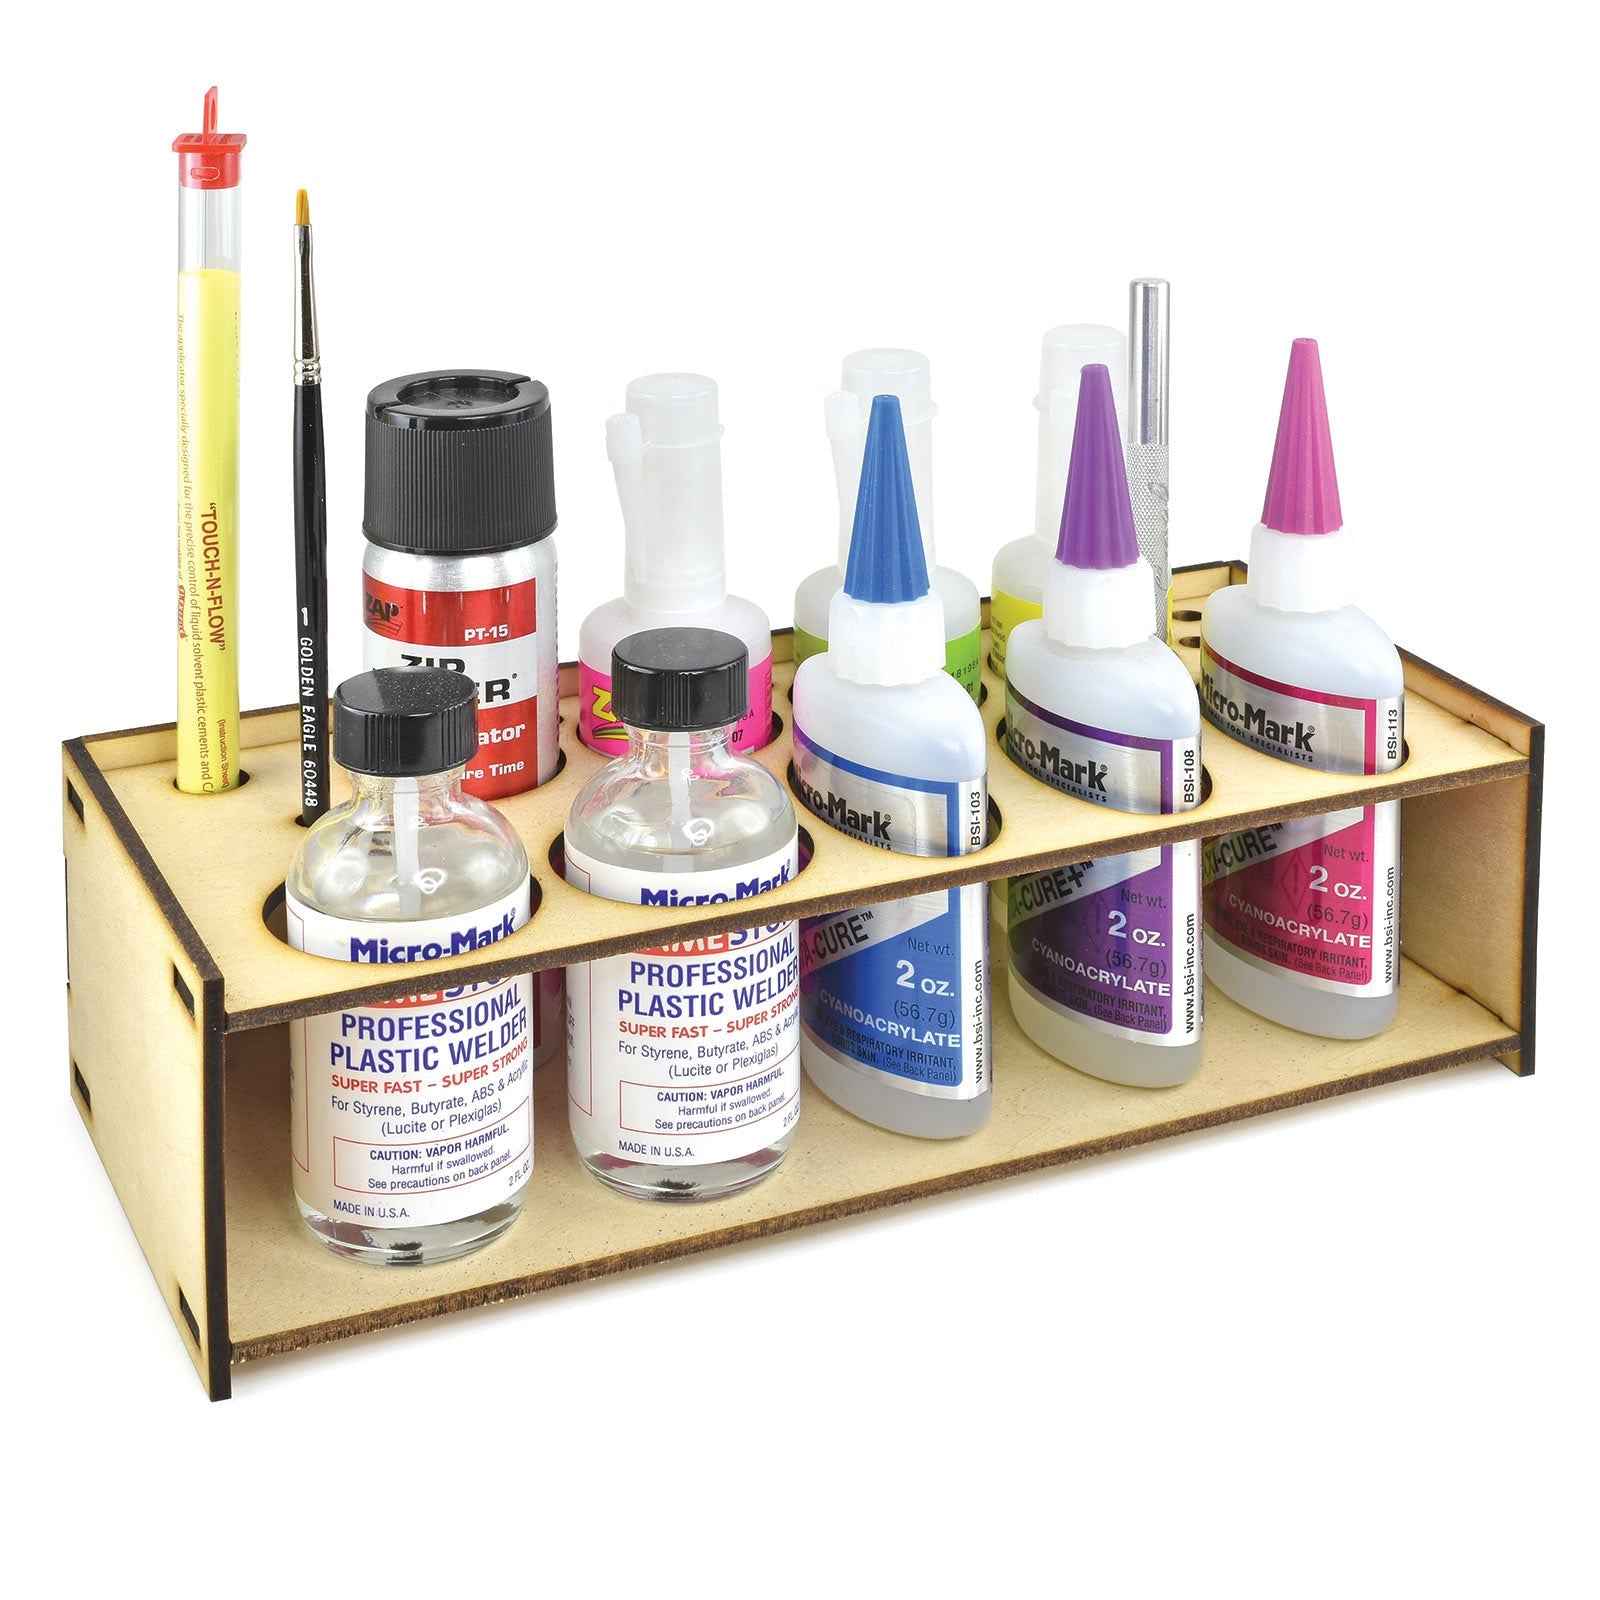 Micro - Mark Gluing Station by Scientific - Micro - Mark Laser Model Kits